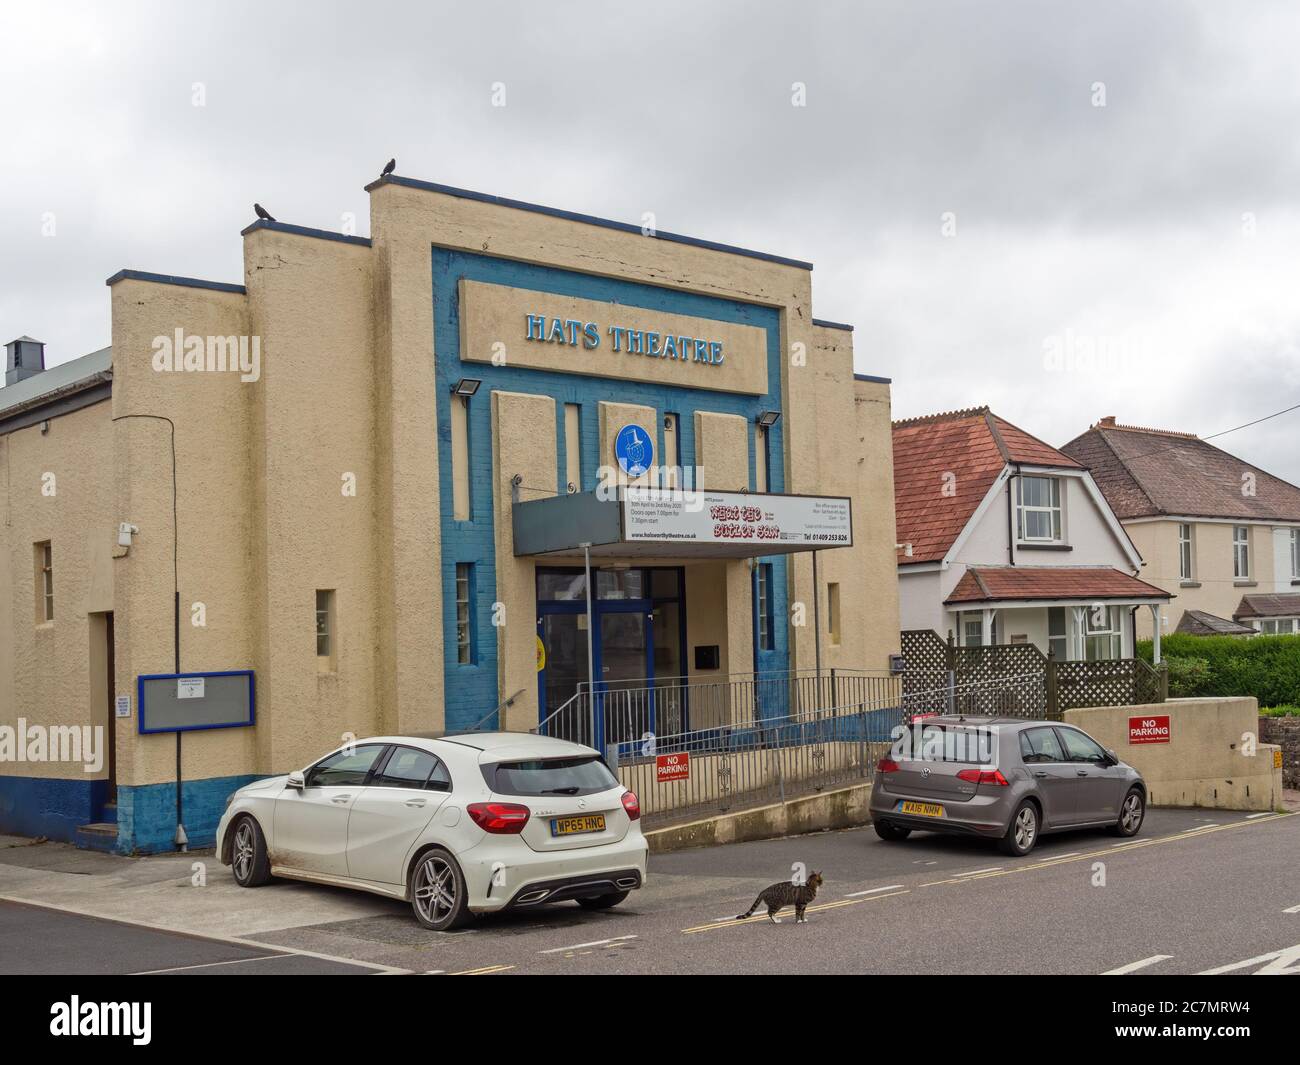 HOLSWORTHY, DEVON, UK - JULY 16 2020: Hats Theatre was once a cinema opened 1932. Stock Photo